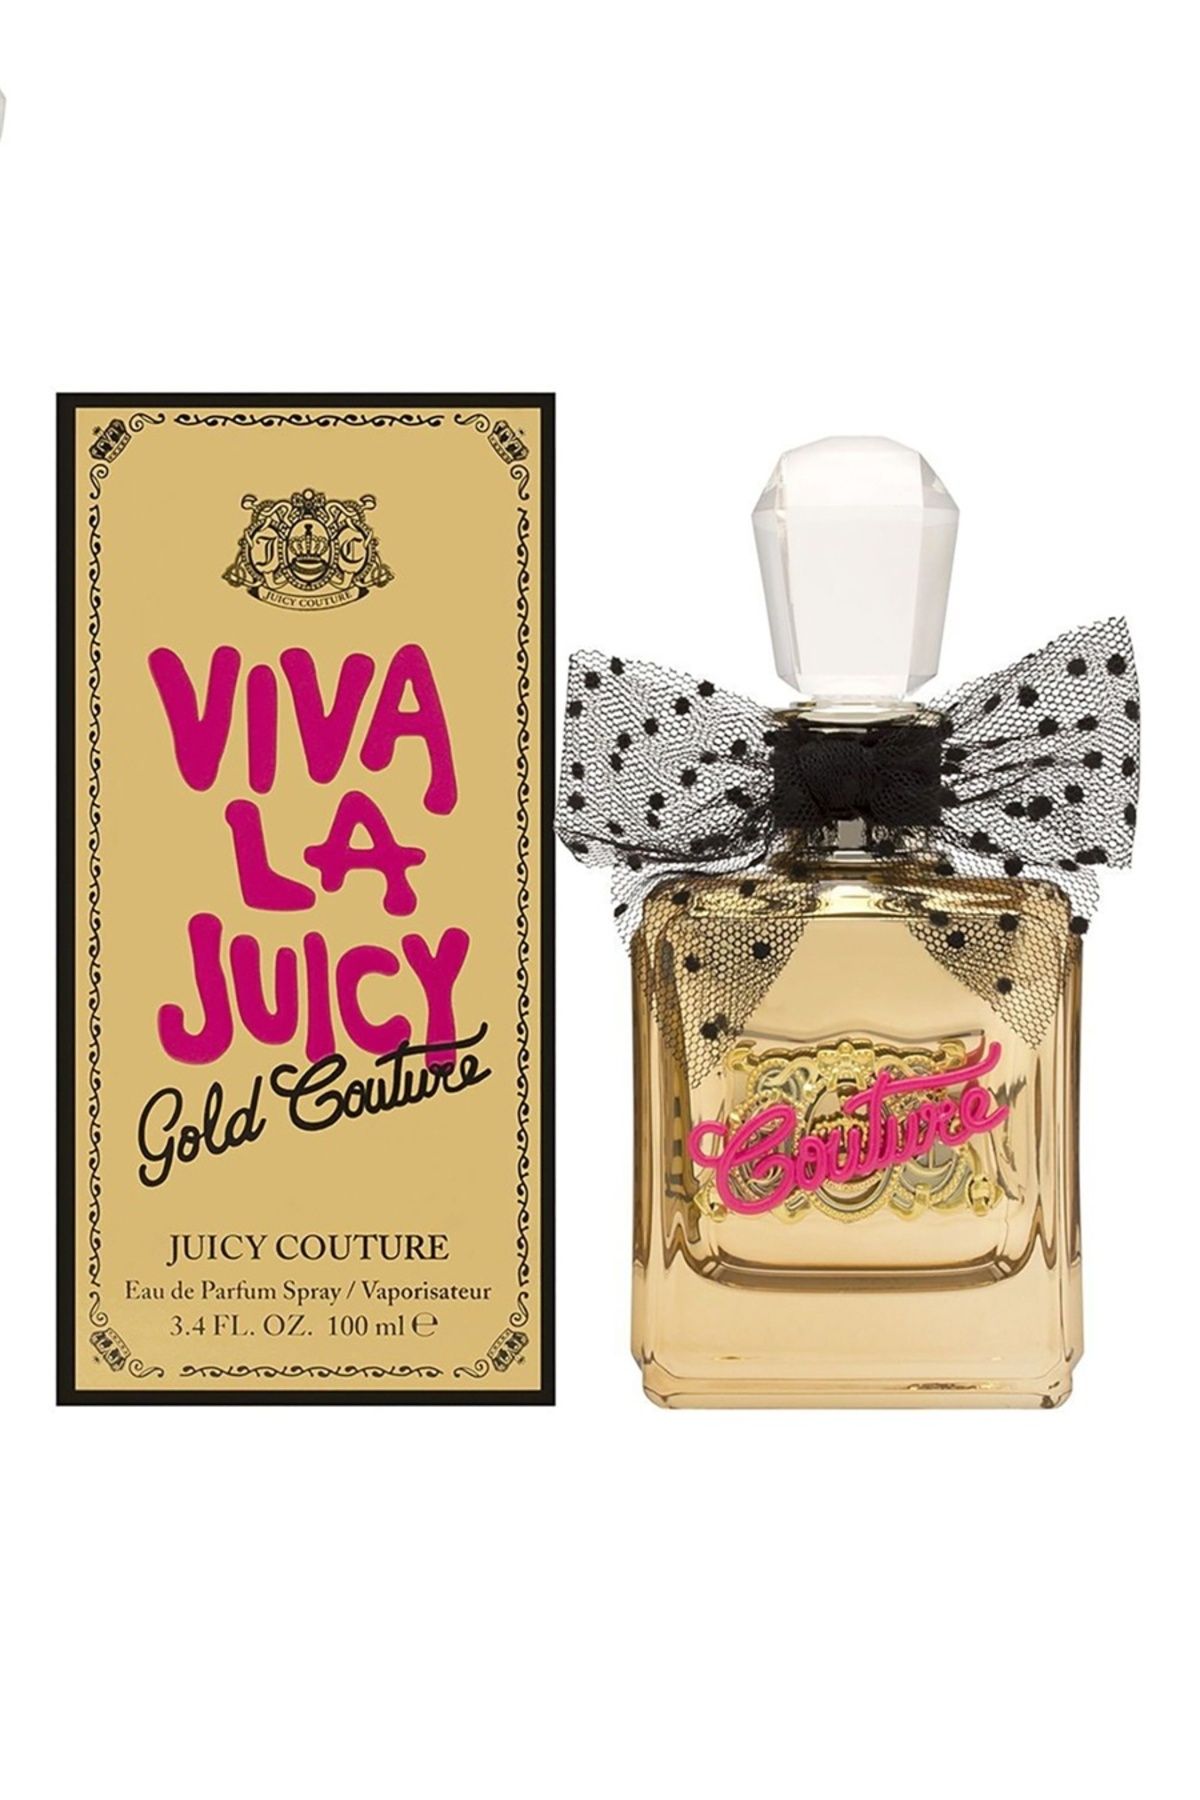 Juicy Couture Juıcy Couture Vıva La Juıcy Gold Couture Edp 100 Ml